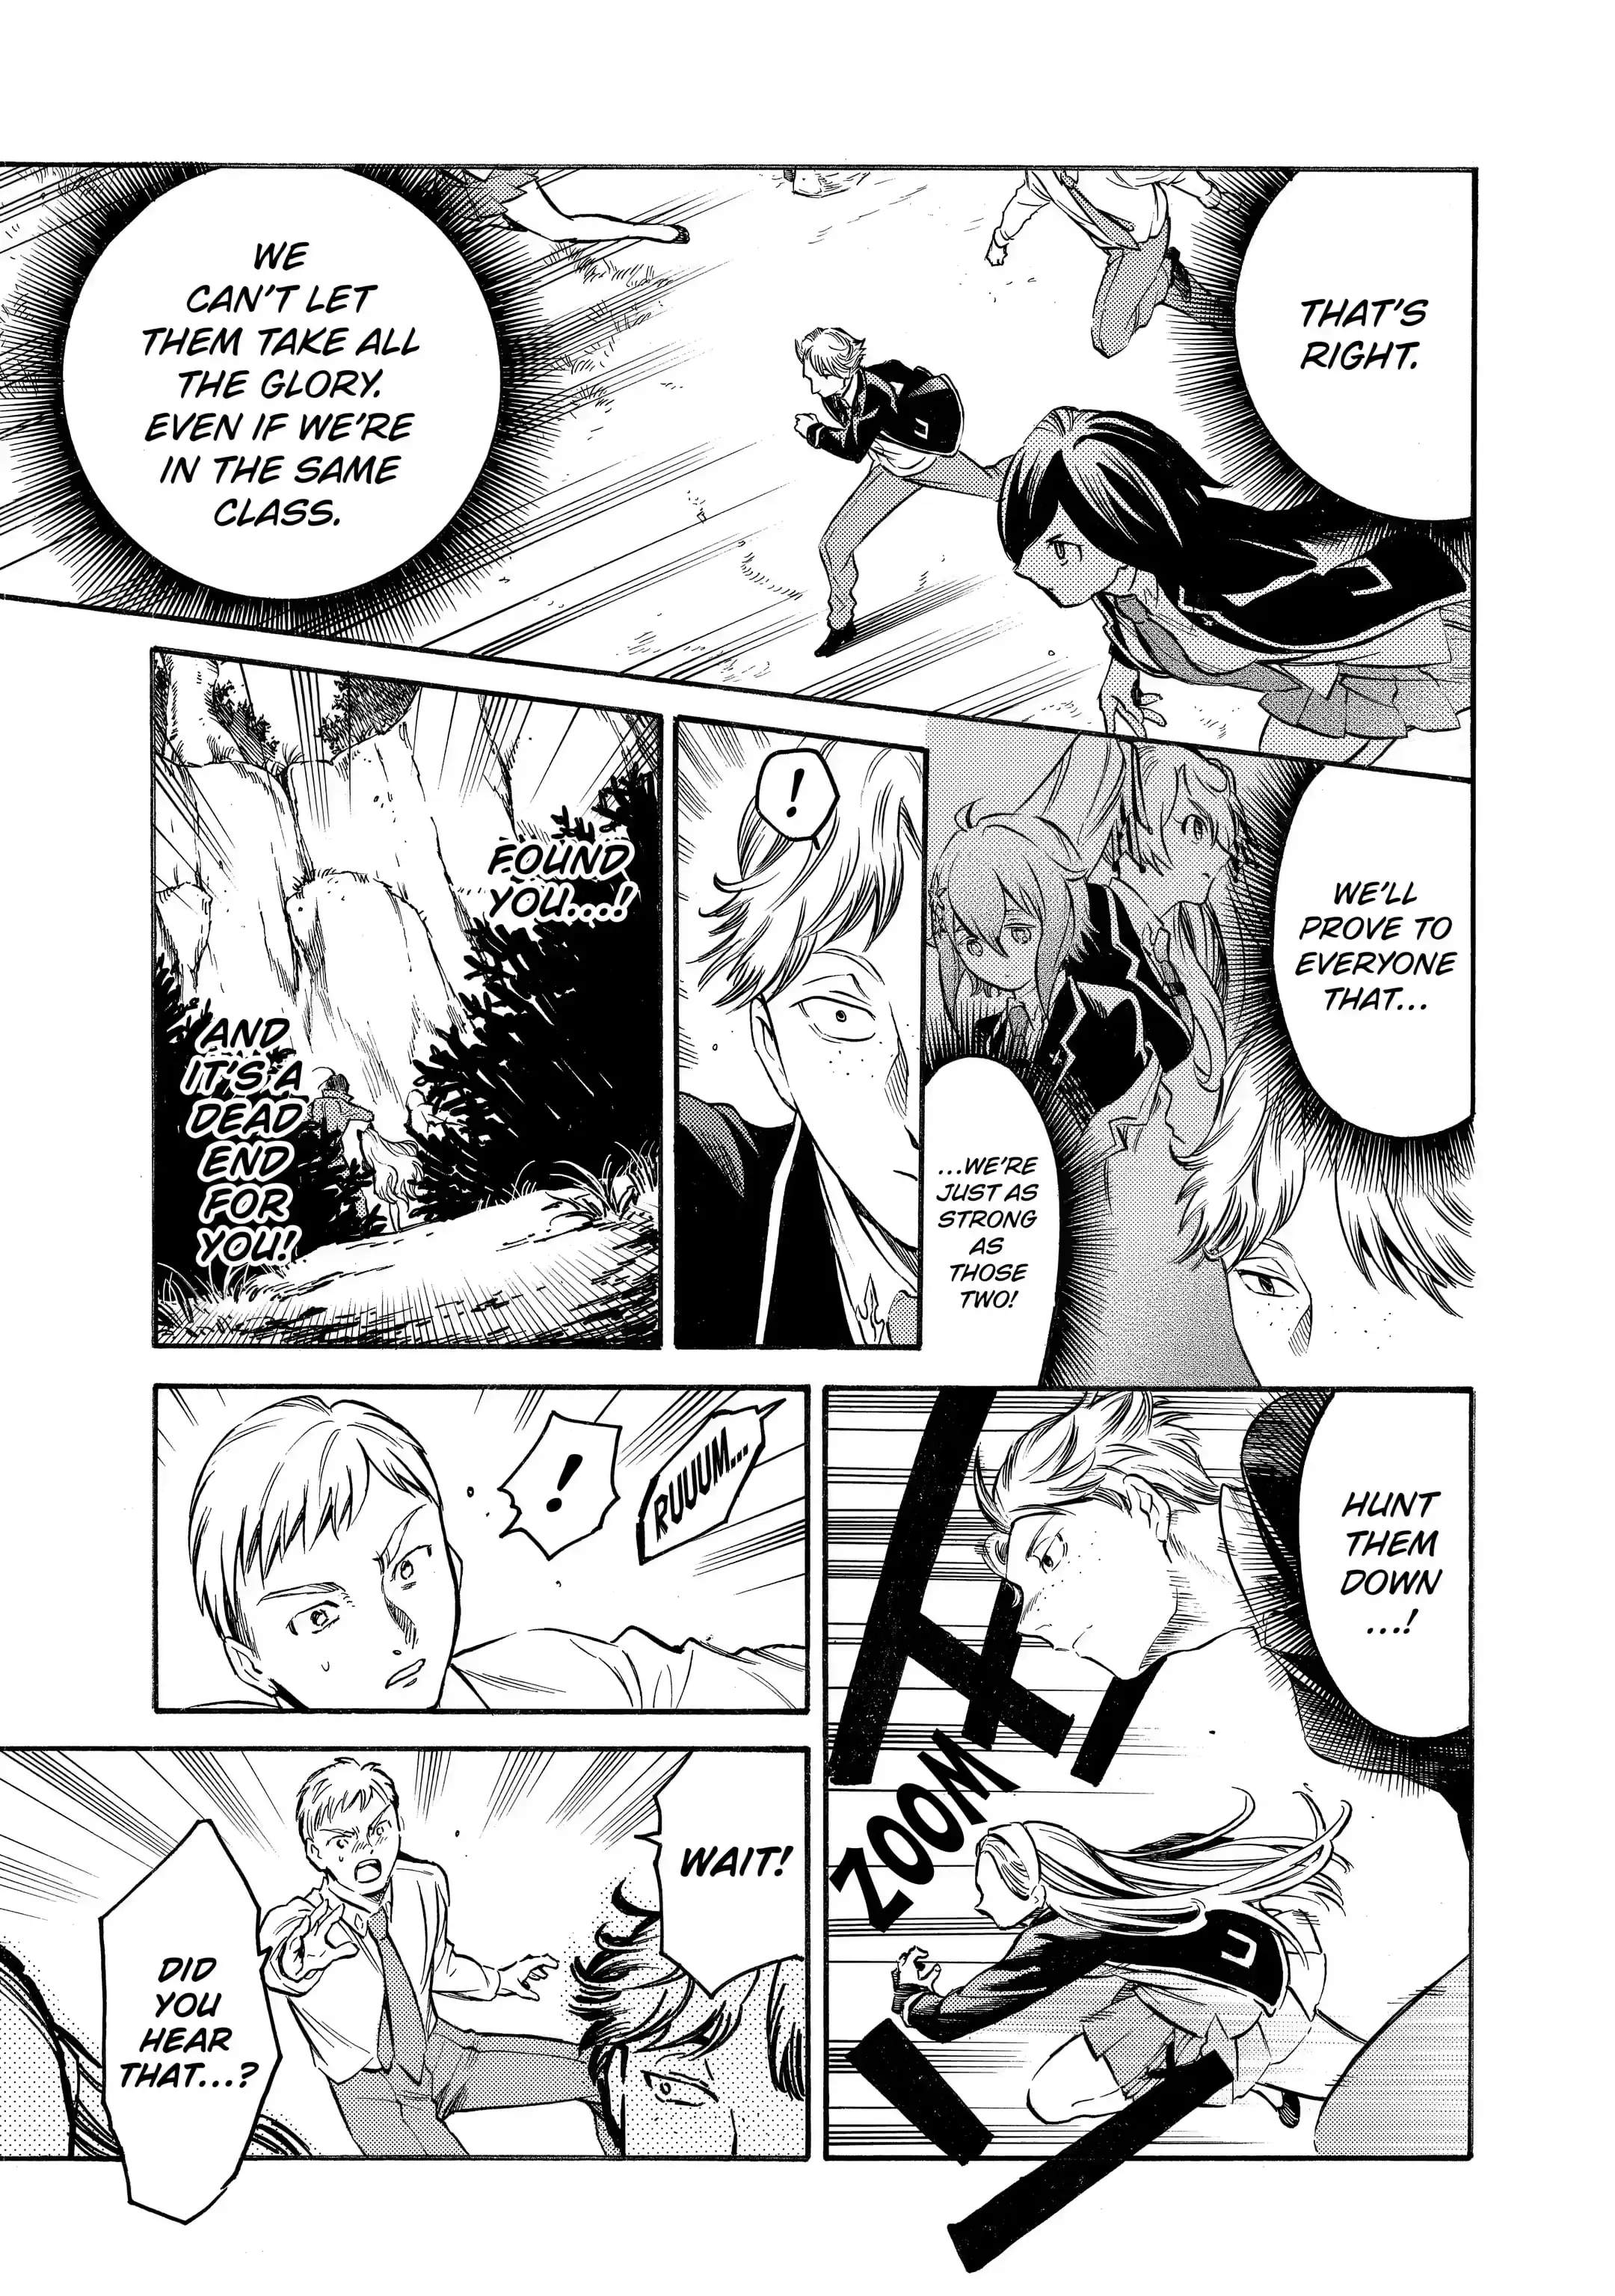 Reincarnation of the Unrivalled Time Mage: The Underachiever at the Magic Academy Turns Out to Be the Strongest Mage Who Controls Time! Chapter 6.3-eng-li - Page 2